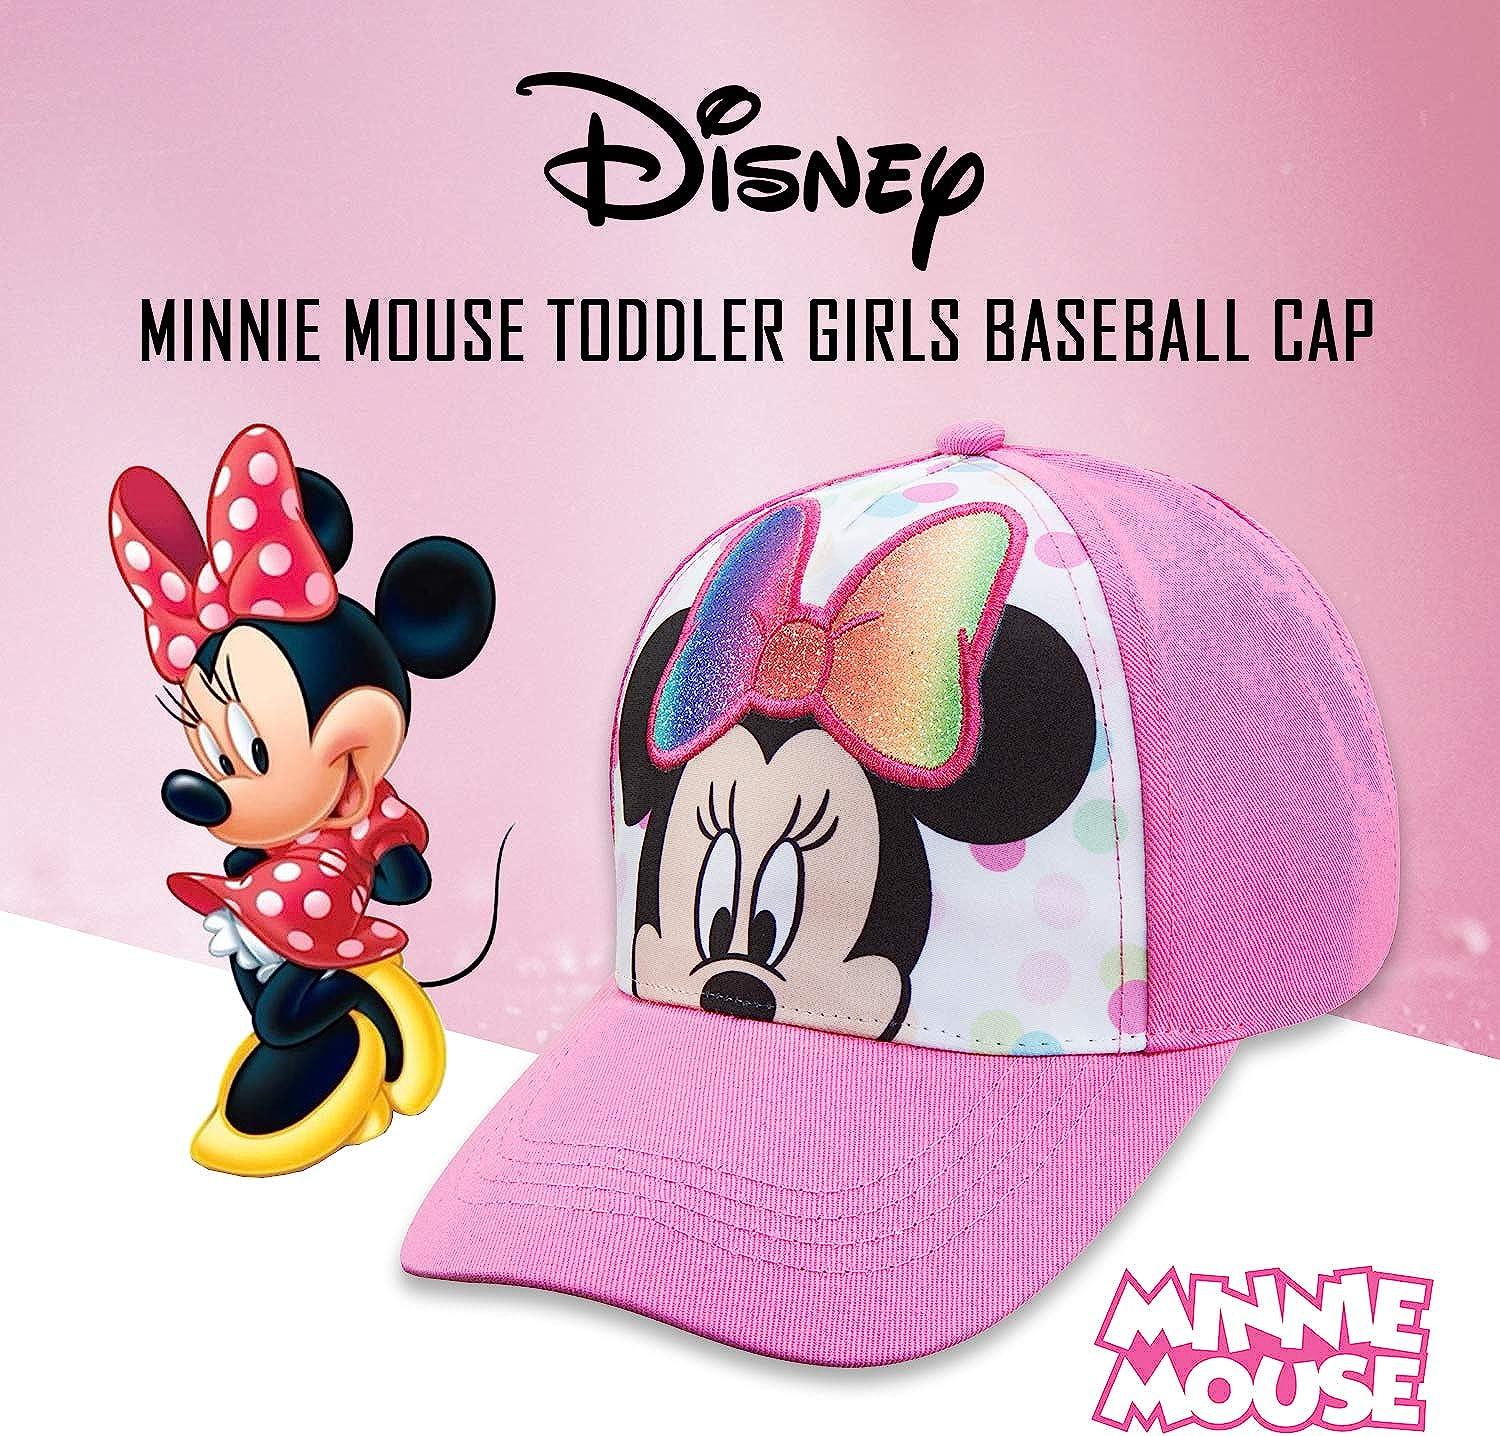 Disney Minnie Mouse Toddler Girls Pink Baseball Cap - Ages 2-4 Years -  Adjustable Velcro Closure (Pink/White)